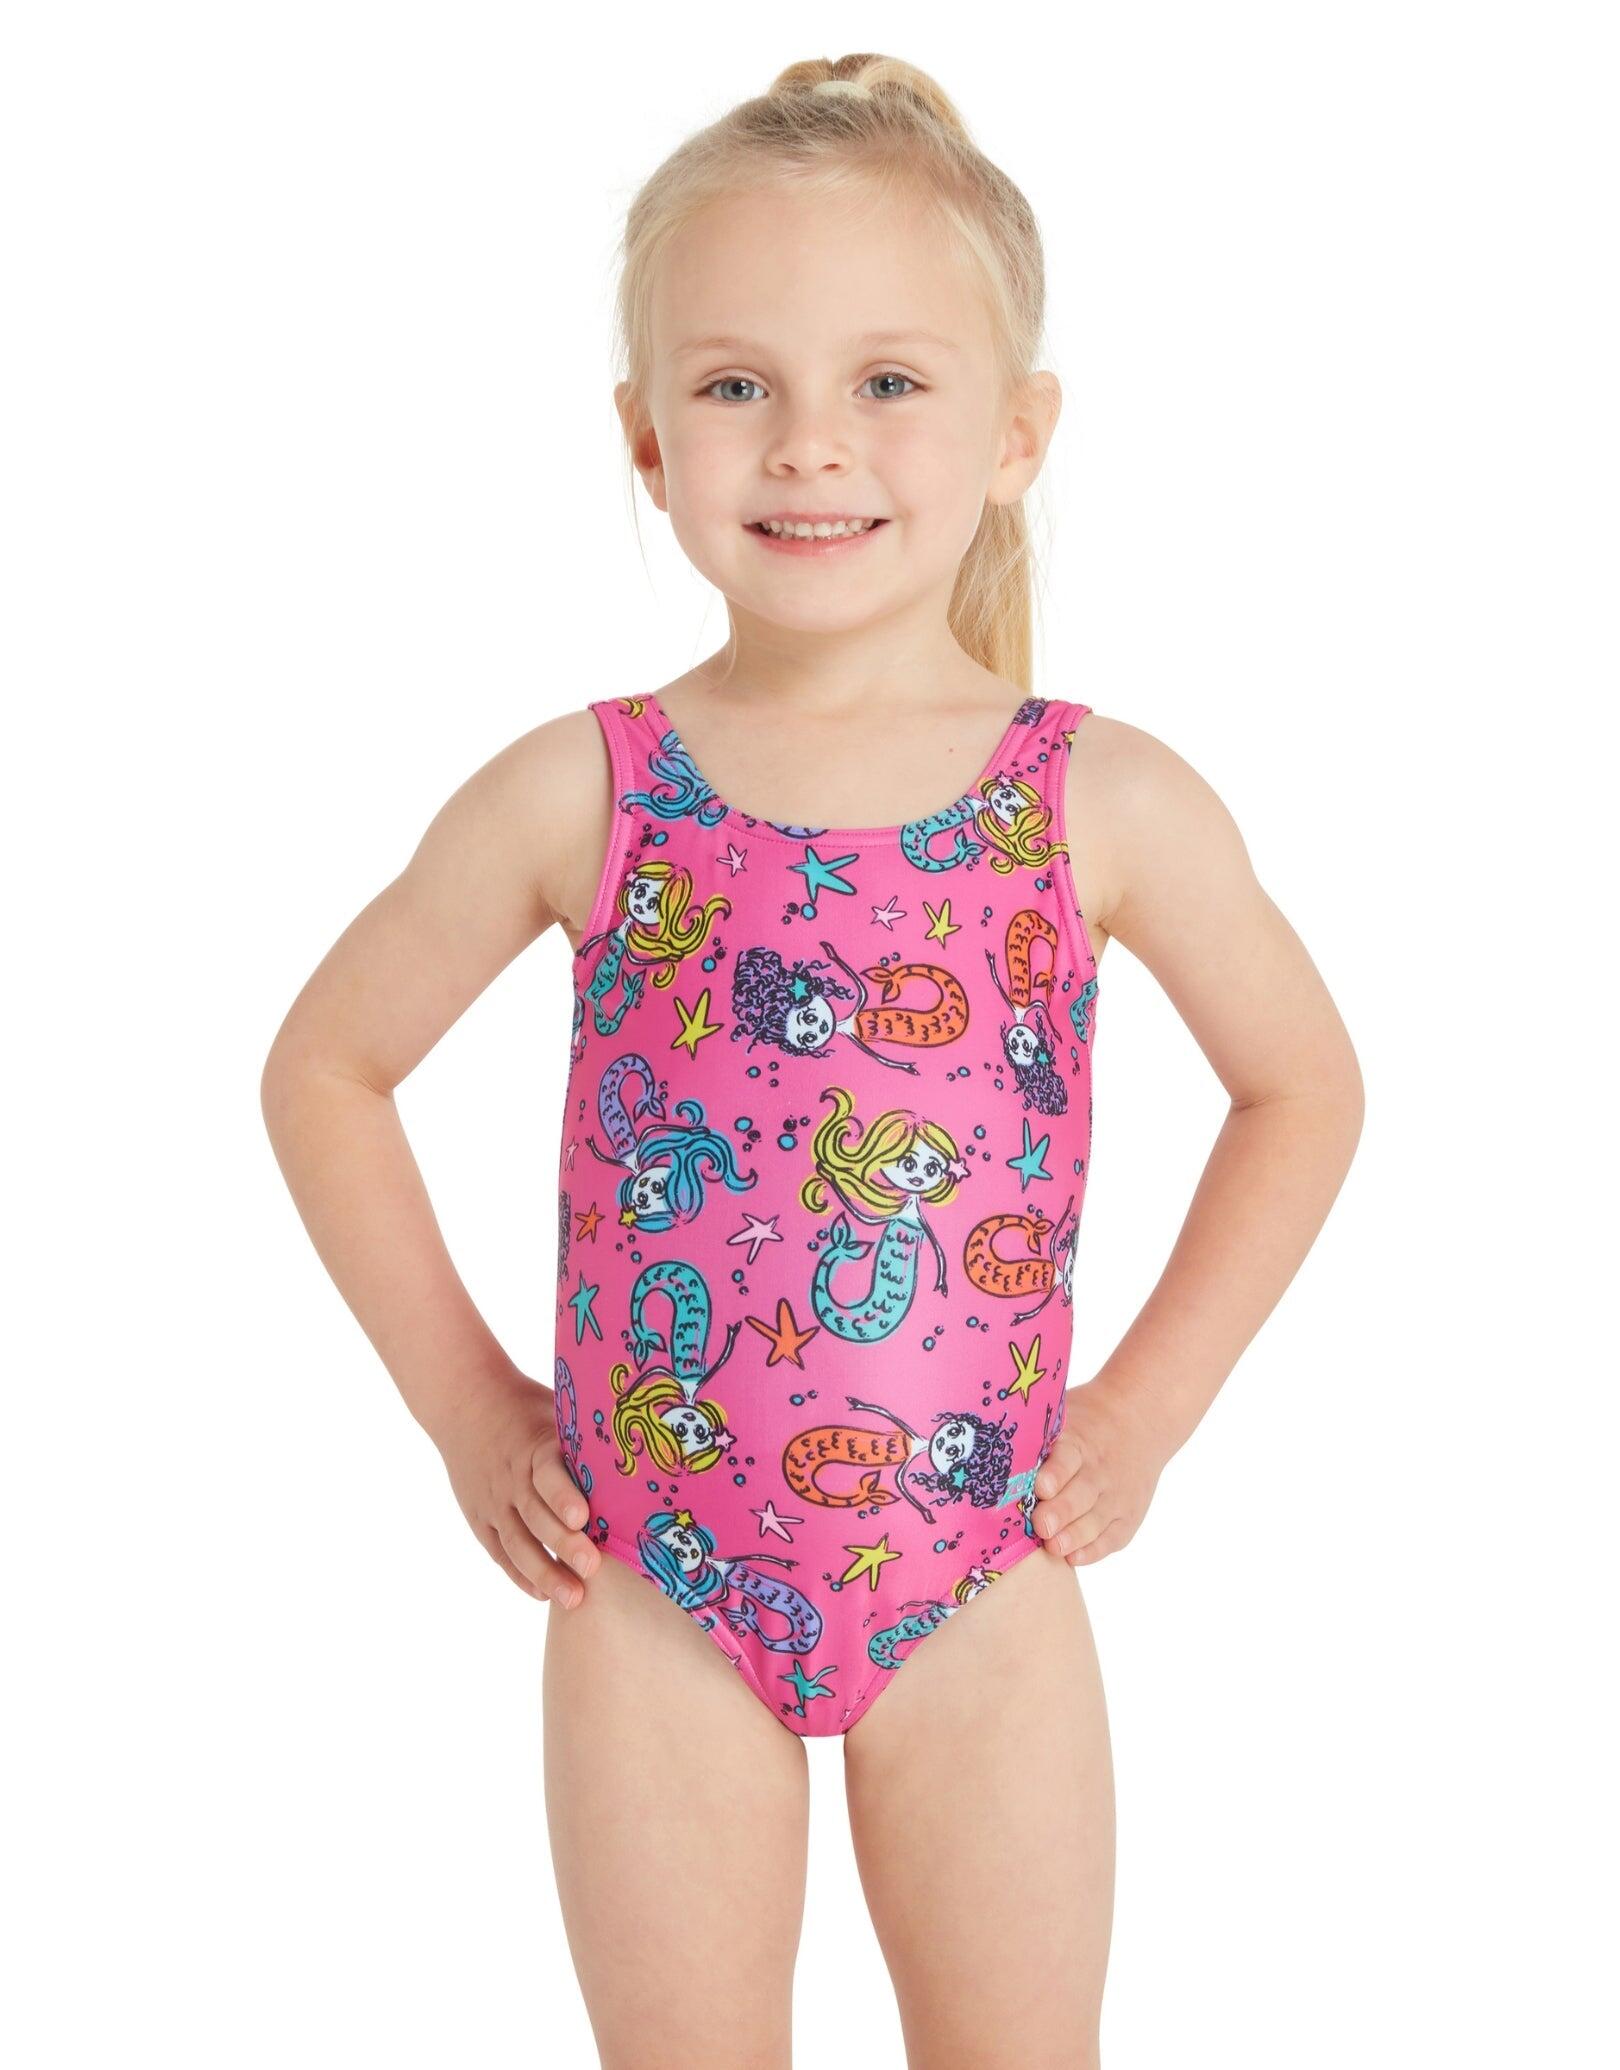 ZOGGS Zoggs Tots Girls Merry Maiden Scoopback Swimsuit - Pink/Multi